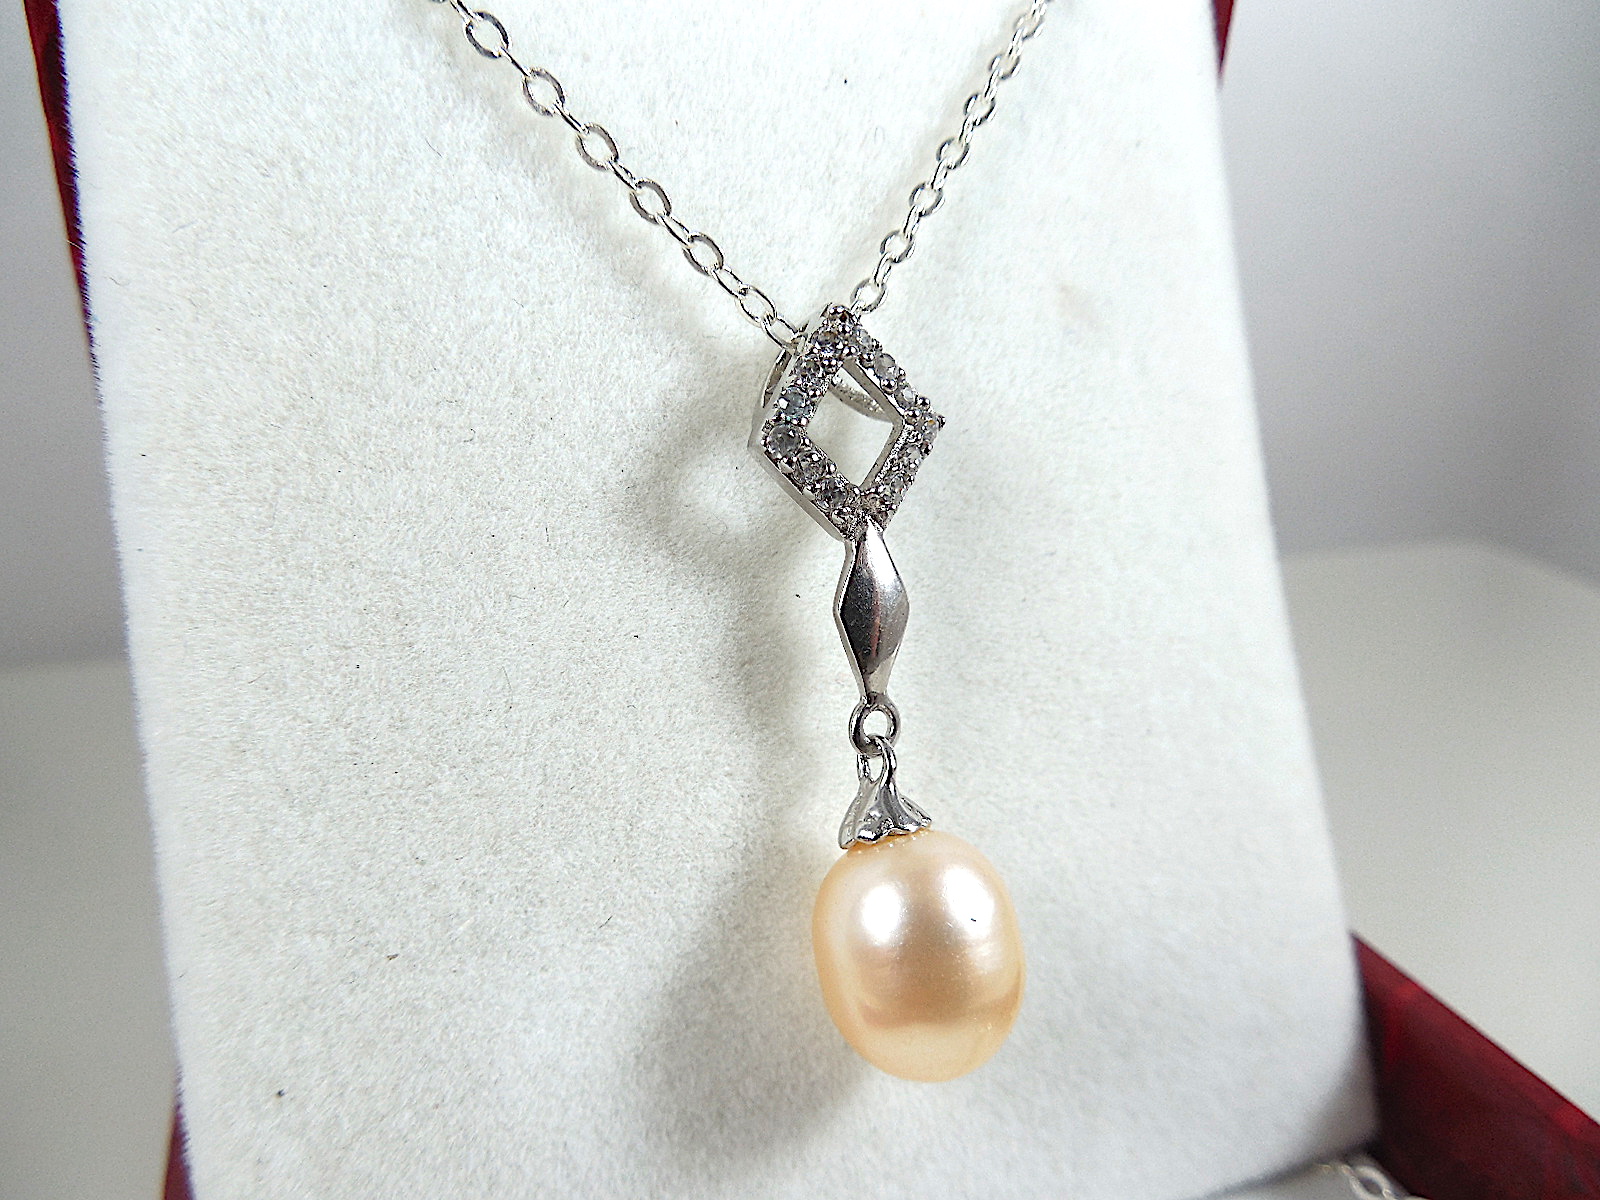 Silver necklace with Pearl pendant